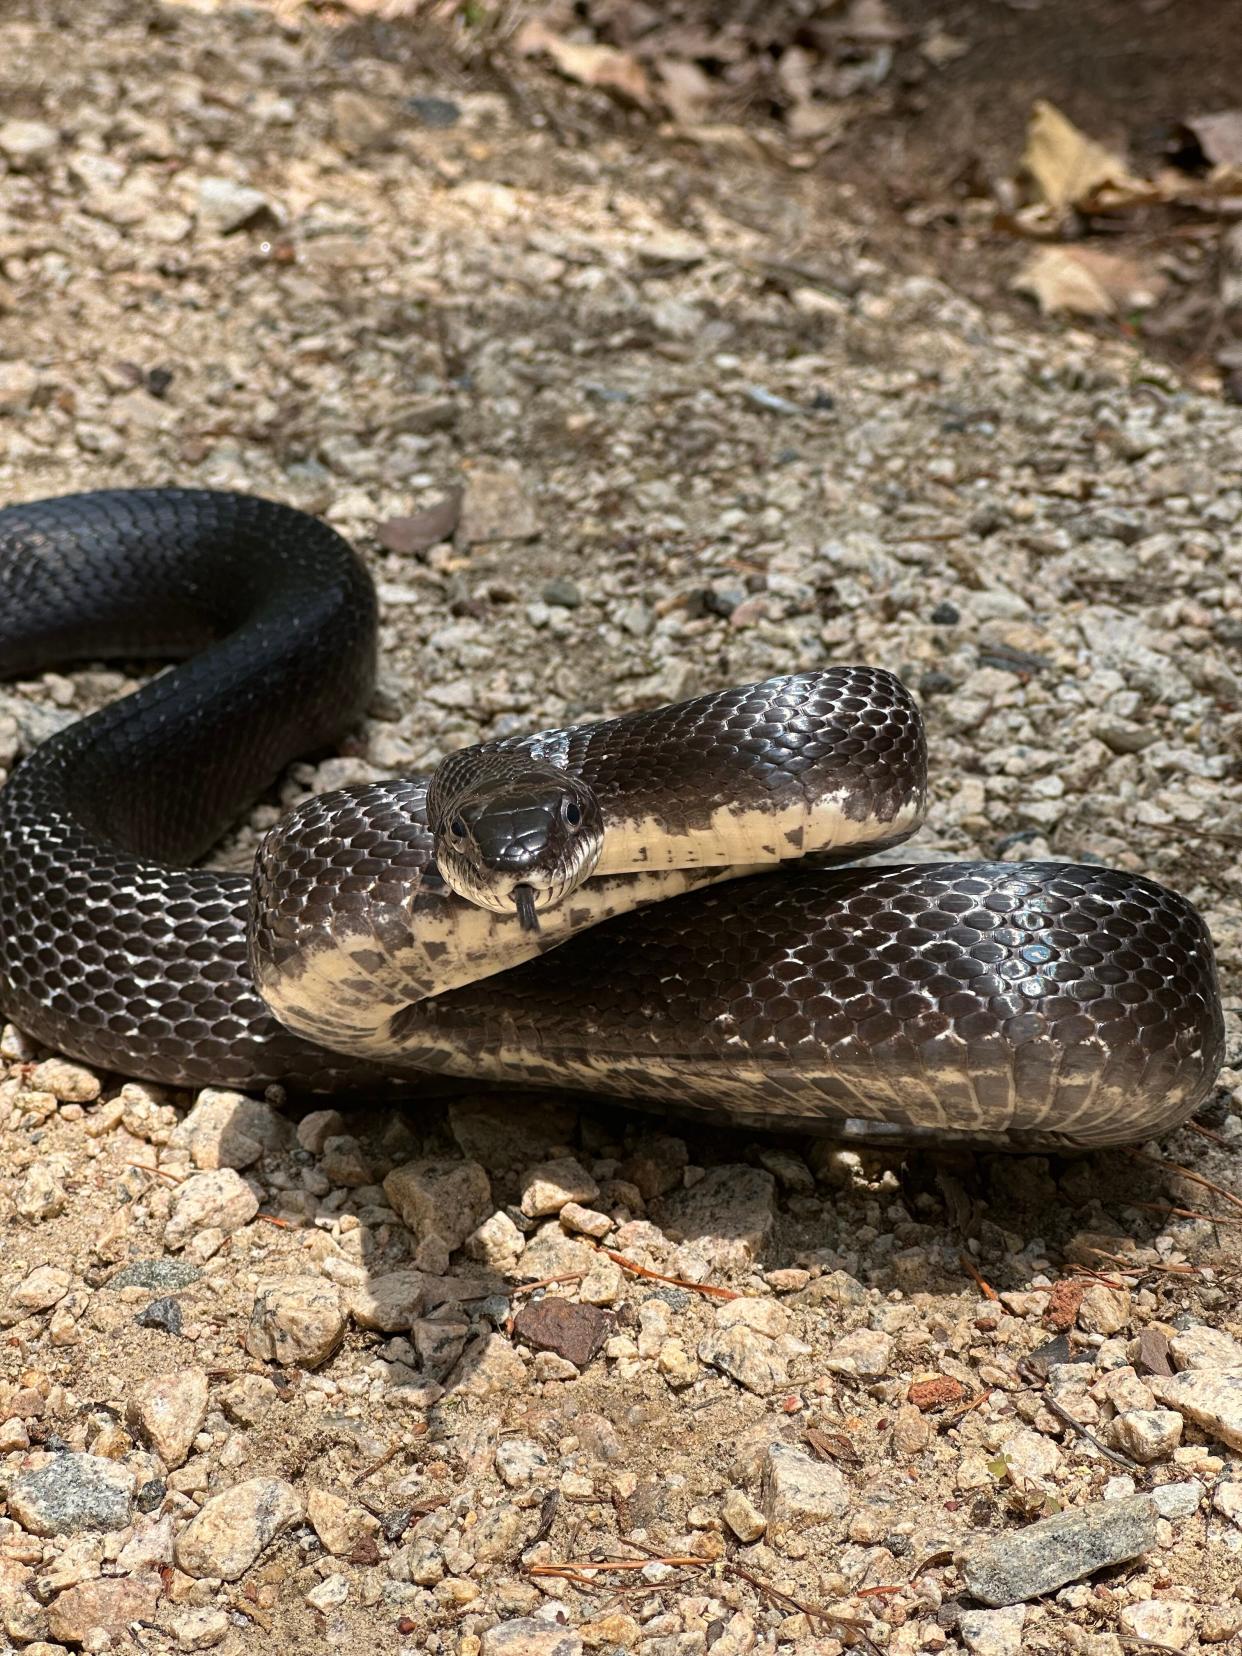 An Eastern rat snake is one of the varieties of snakes commonly found in Georgia.